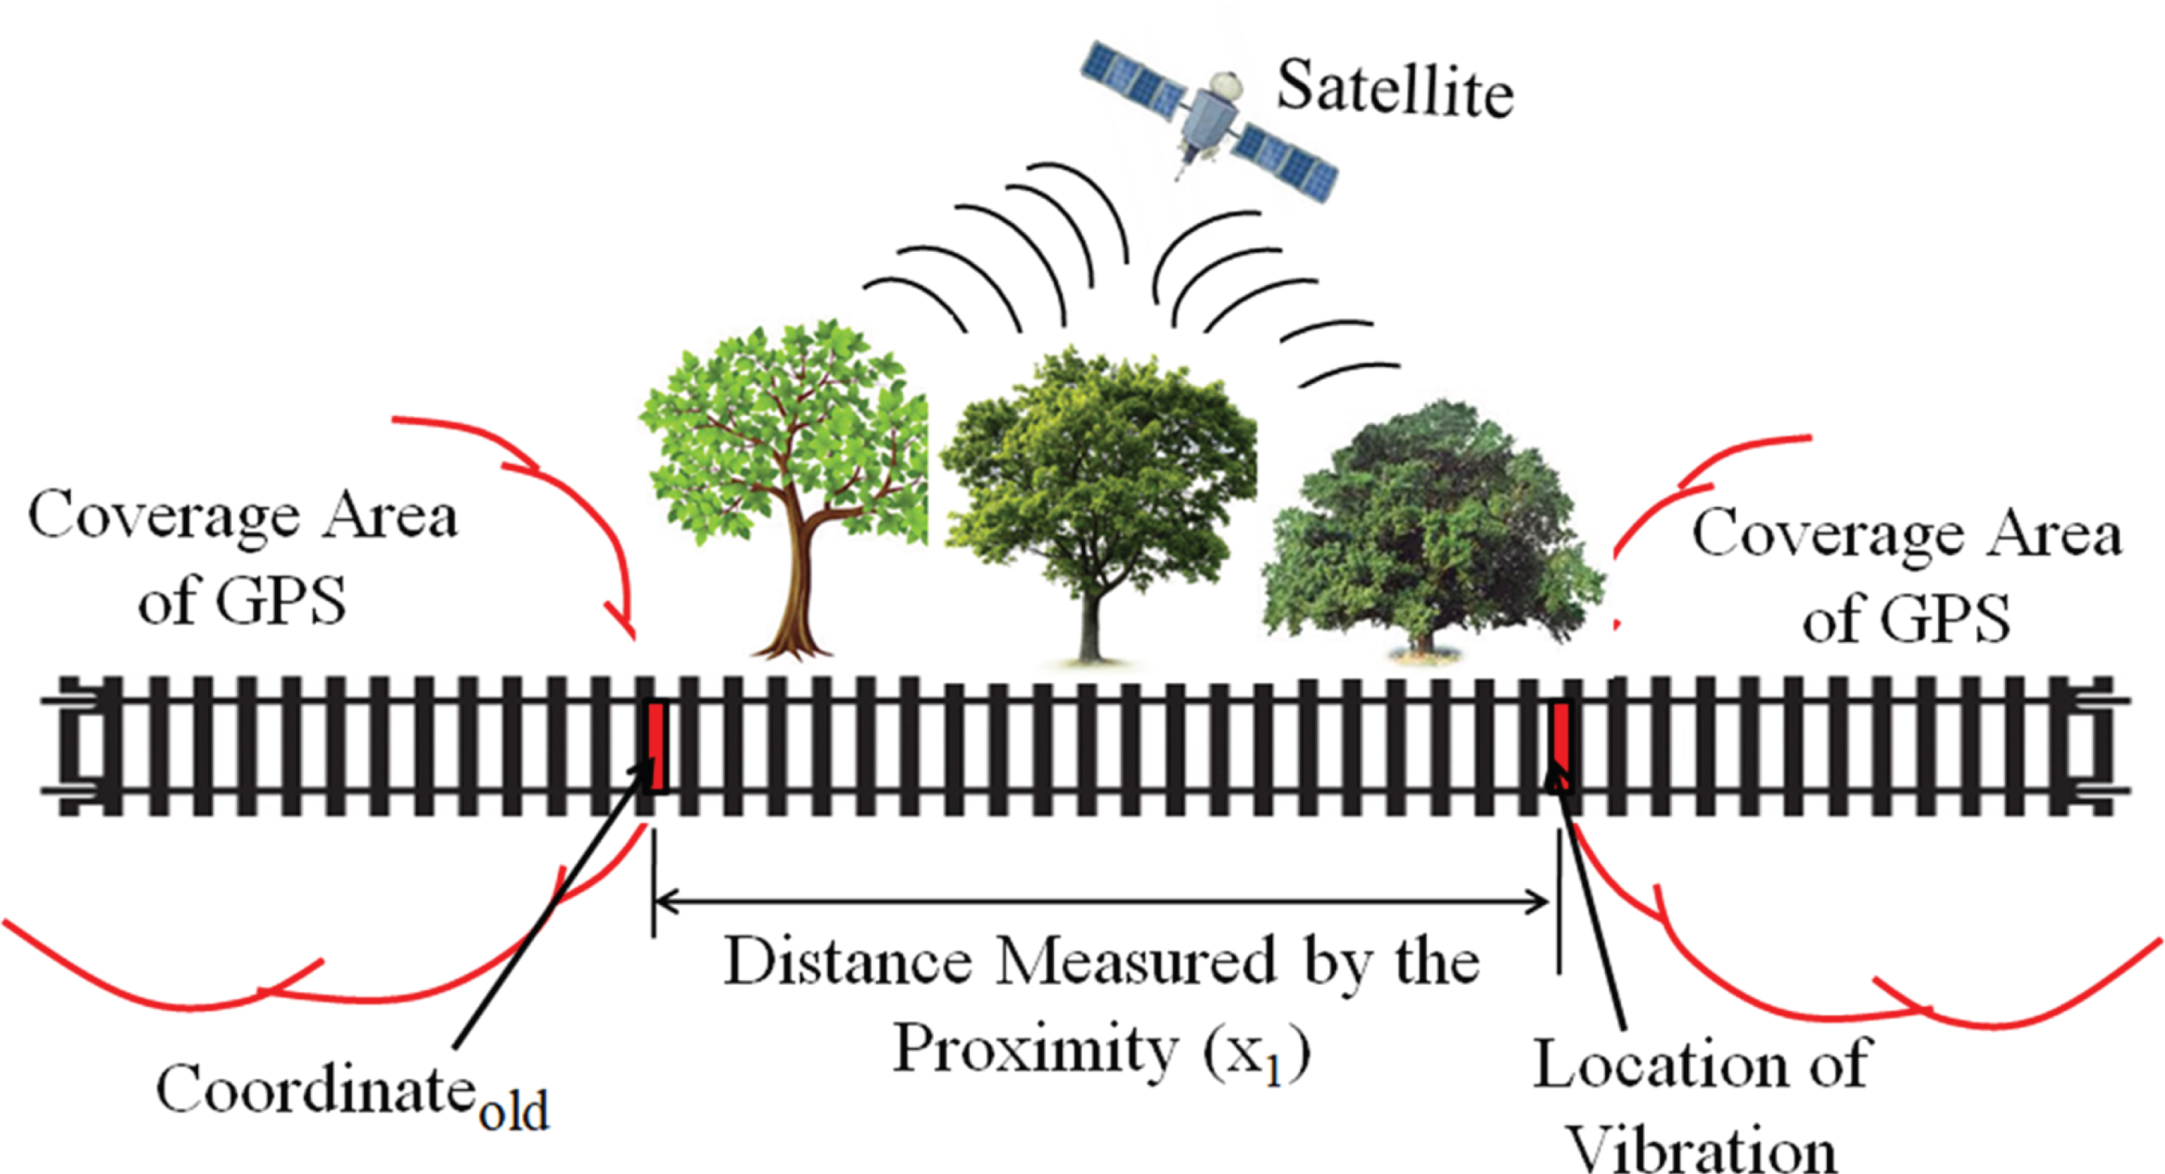 GPS coverage problem and estimation of LOA.